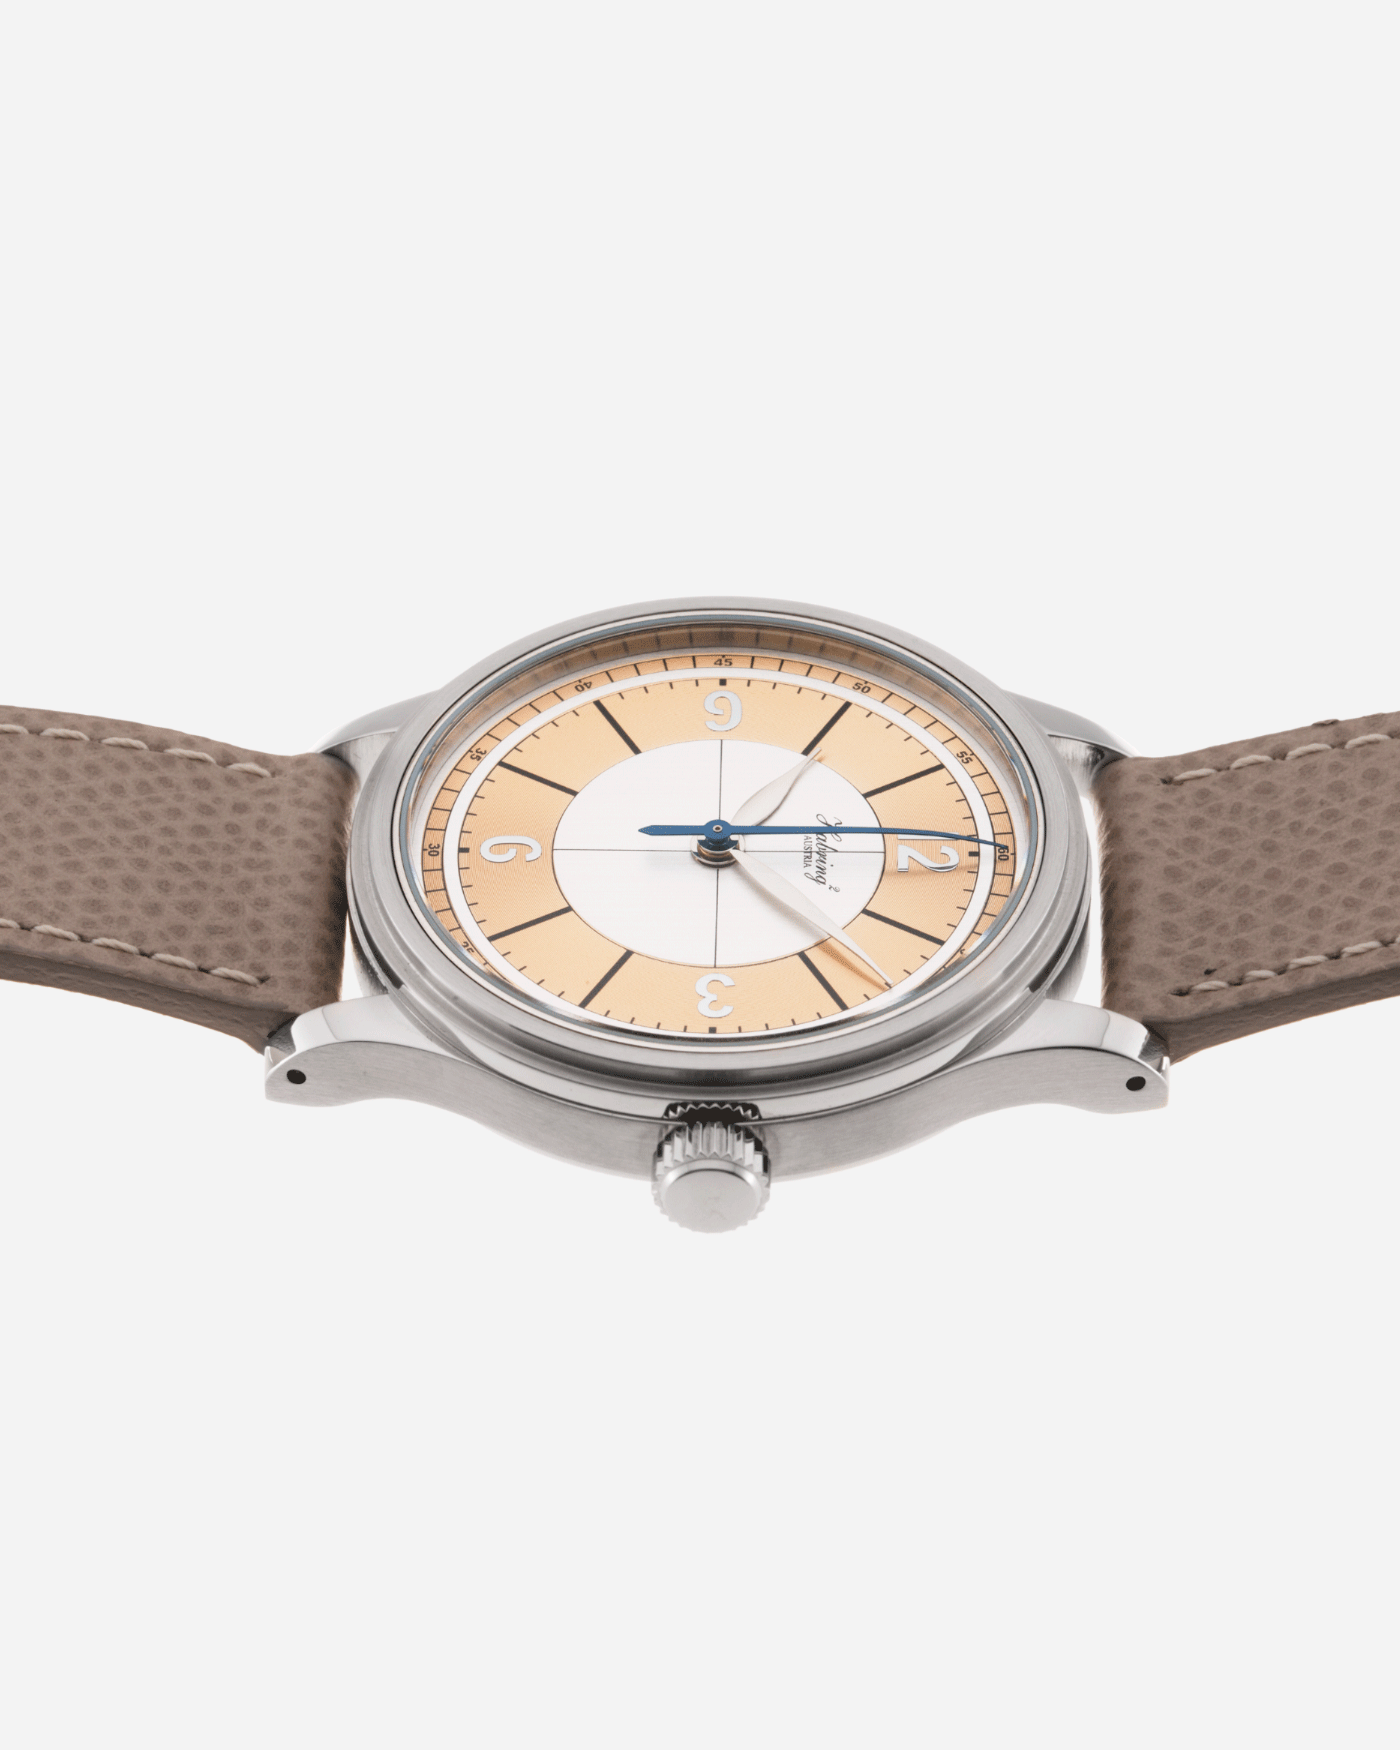 Brand: Habring / Massena Lab Model: Erwin02 Year: 2020 Material: Stainless Steel Movement: Cal. A11s Case Diameter: 38.5mm Lug Width: 20mm Bracelet/Strap: Habring Taupe Calf Strap and Stainless Steel Tang Buckle